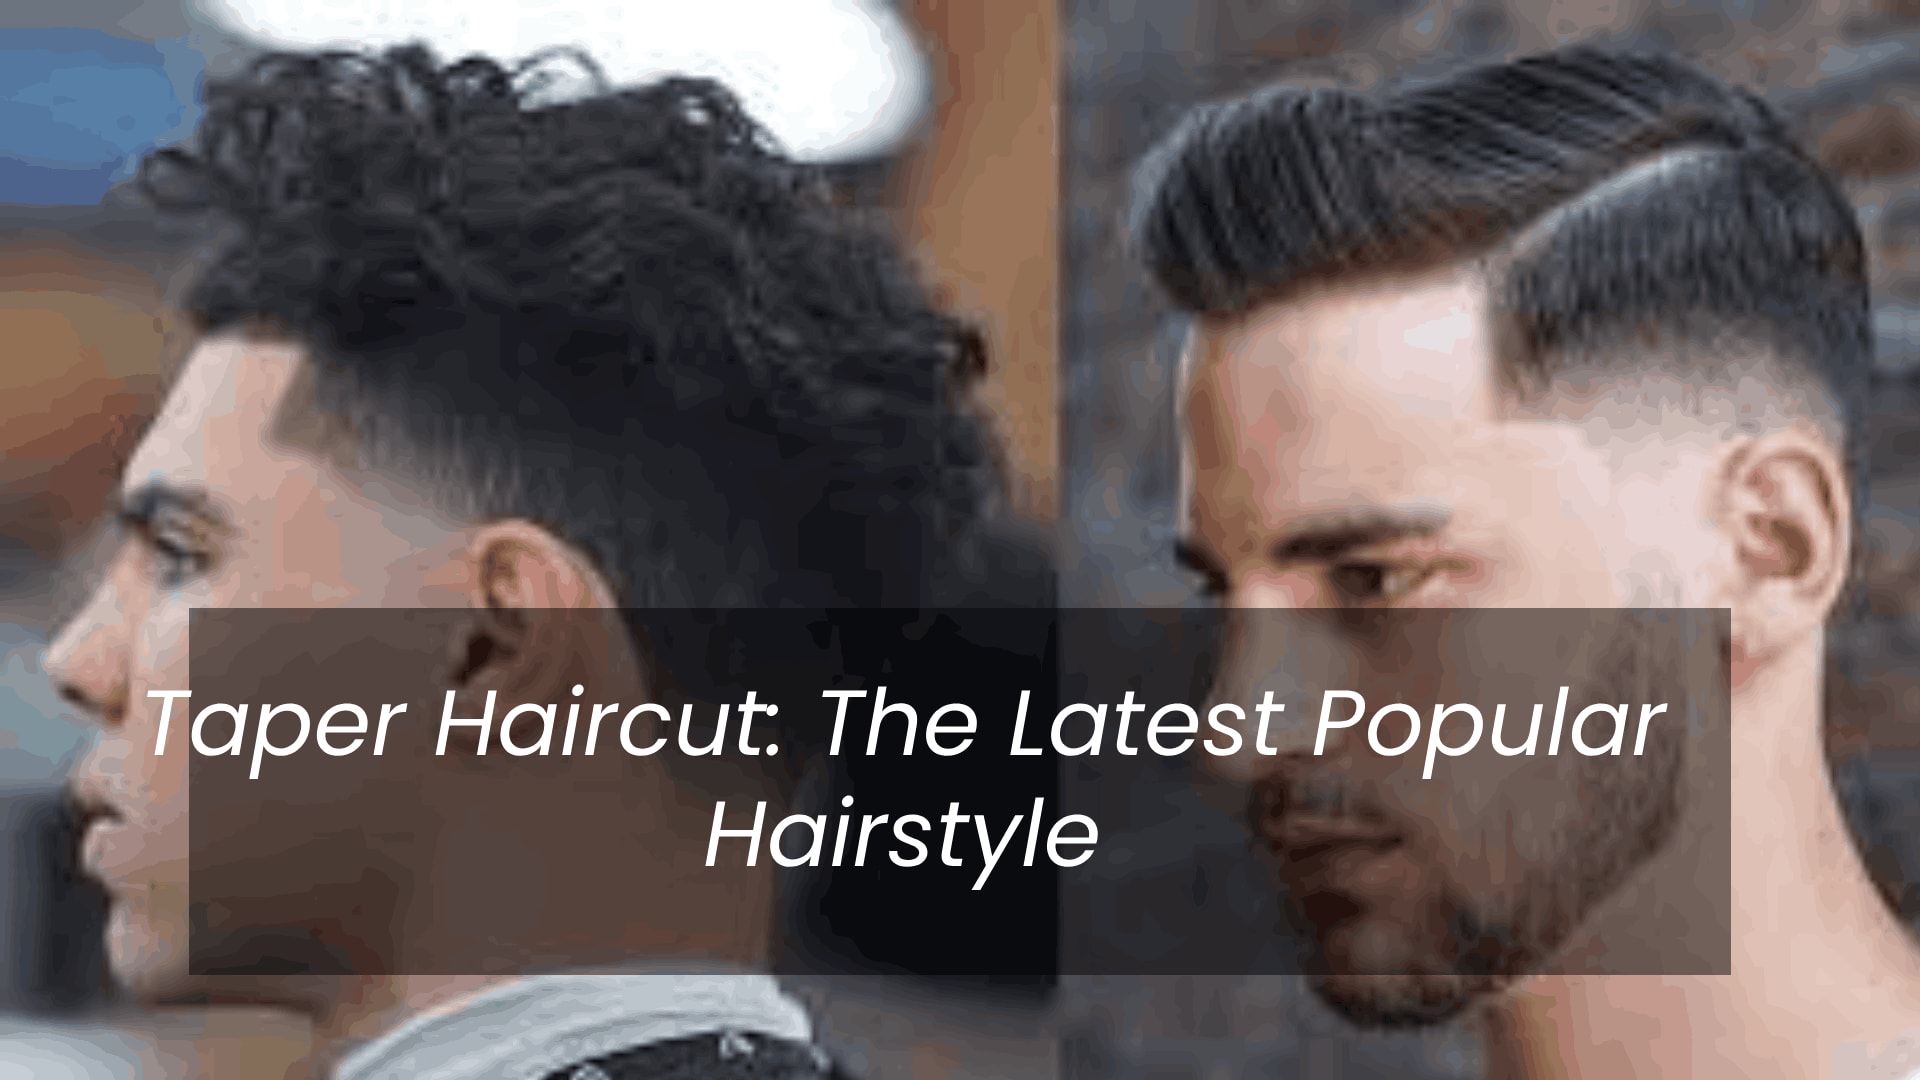 Best Taper Fade Haircut for Men. Find more Incredible haircuts at